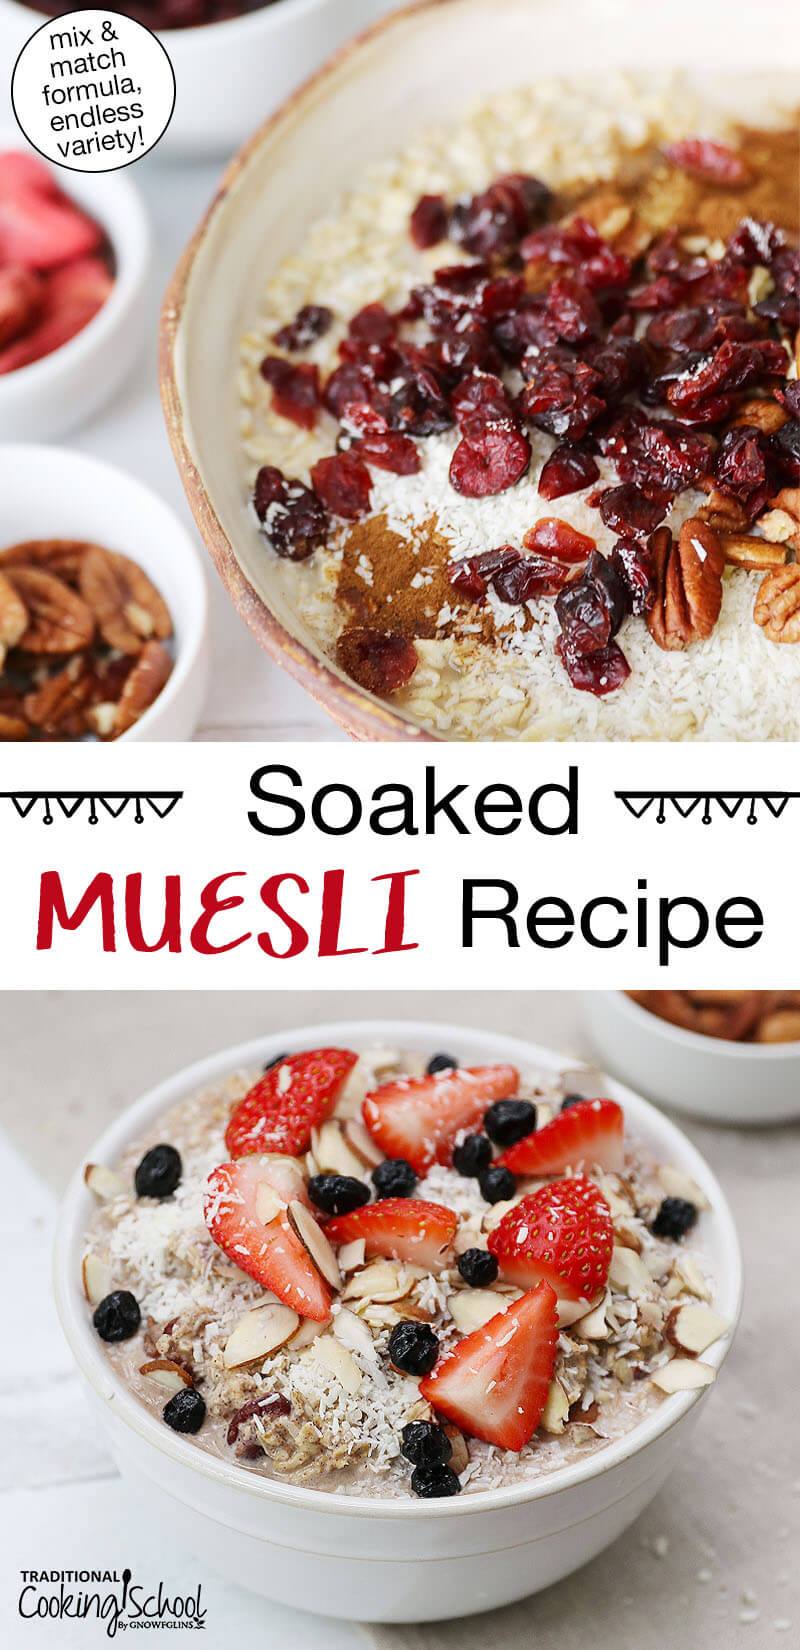 Photo collage of muesli bowls topped two ways: the first with dried canberries, cinnamon, shredded coconut, and pecans; the second with fresh strawberries, blueberries, slivered almonds, and shredded coconut. Text overlay says: "Soaked Muesli Recipe (mix & match formula, endless variety!)"